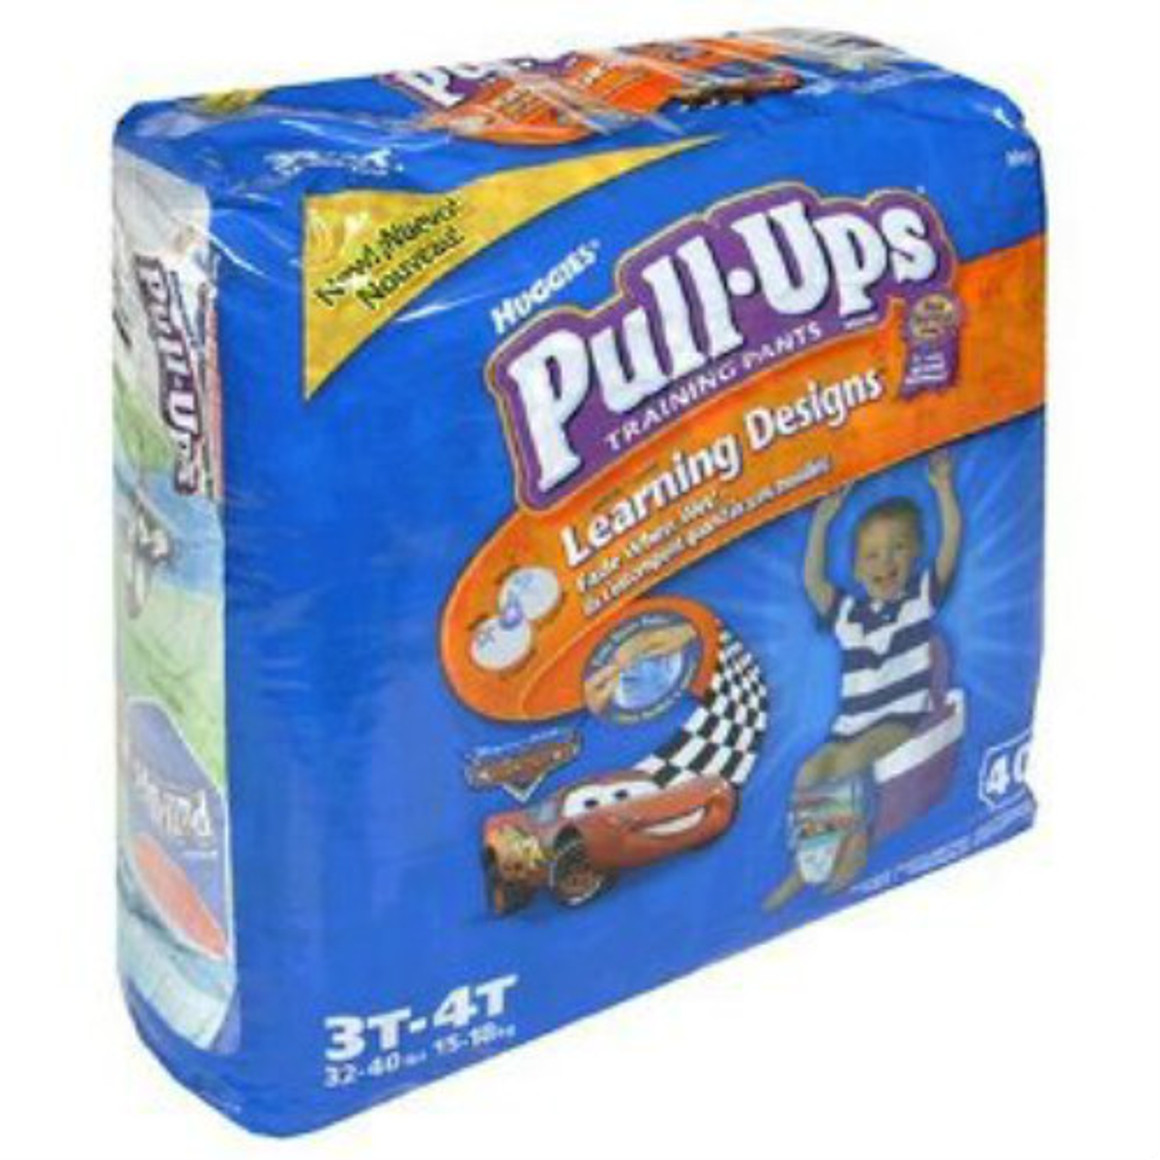 Pull-Ups Learning Designs Boys' Potty Training Pants, 3T-4T (32-40